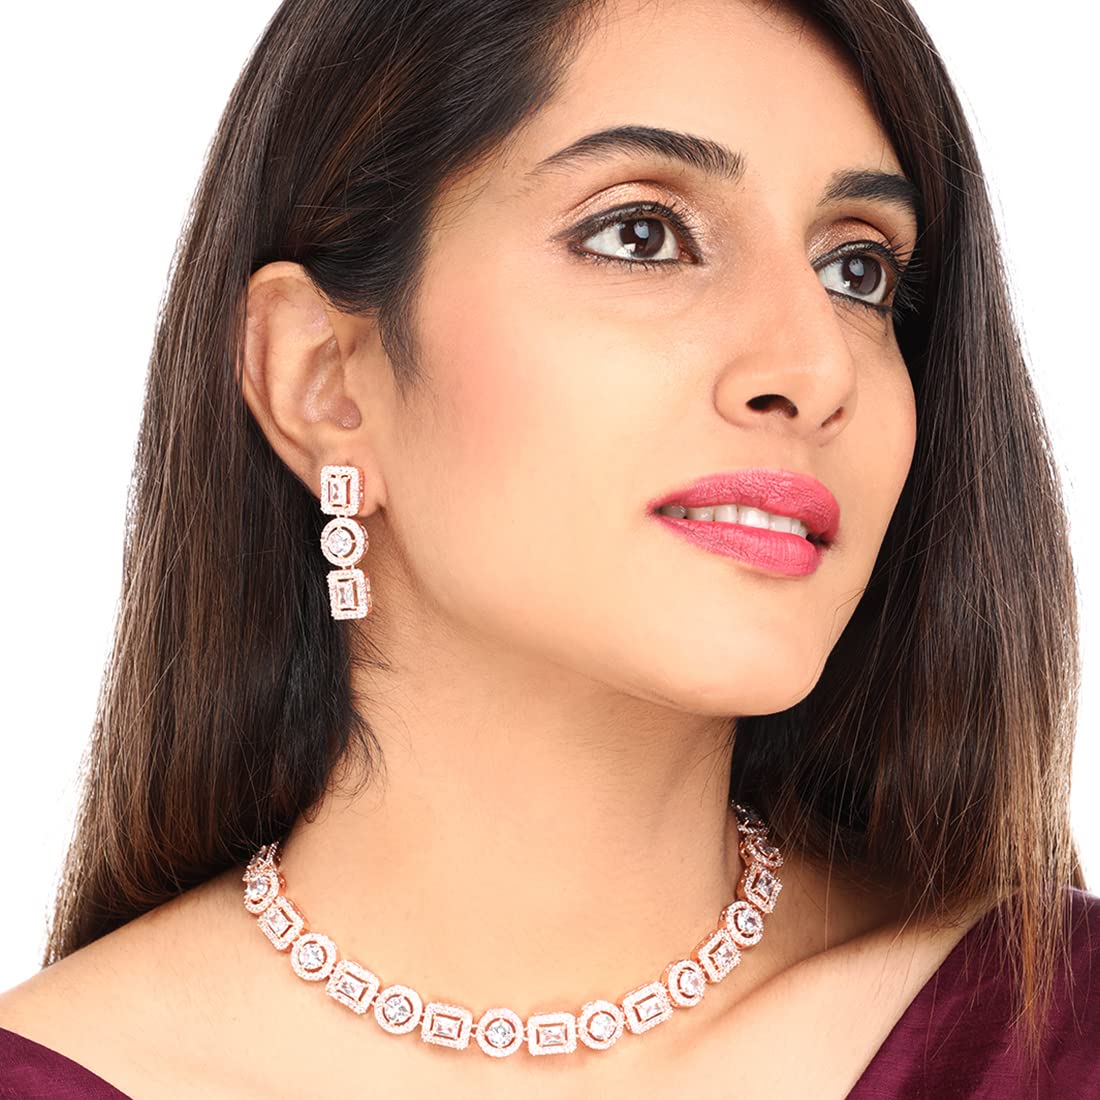 Fancy Square Chokar Necklace Set for women and girls.